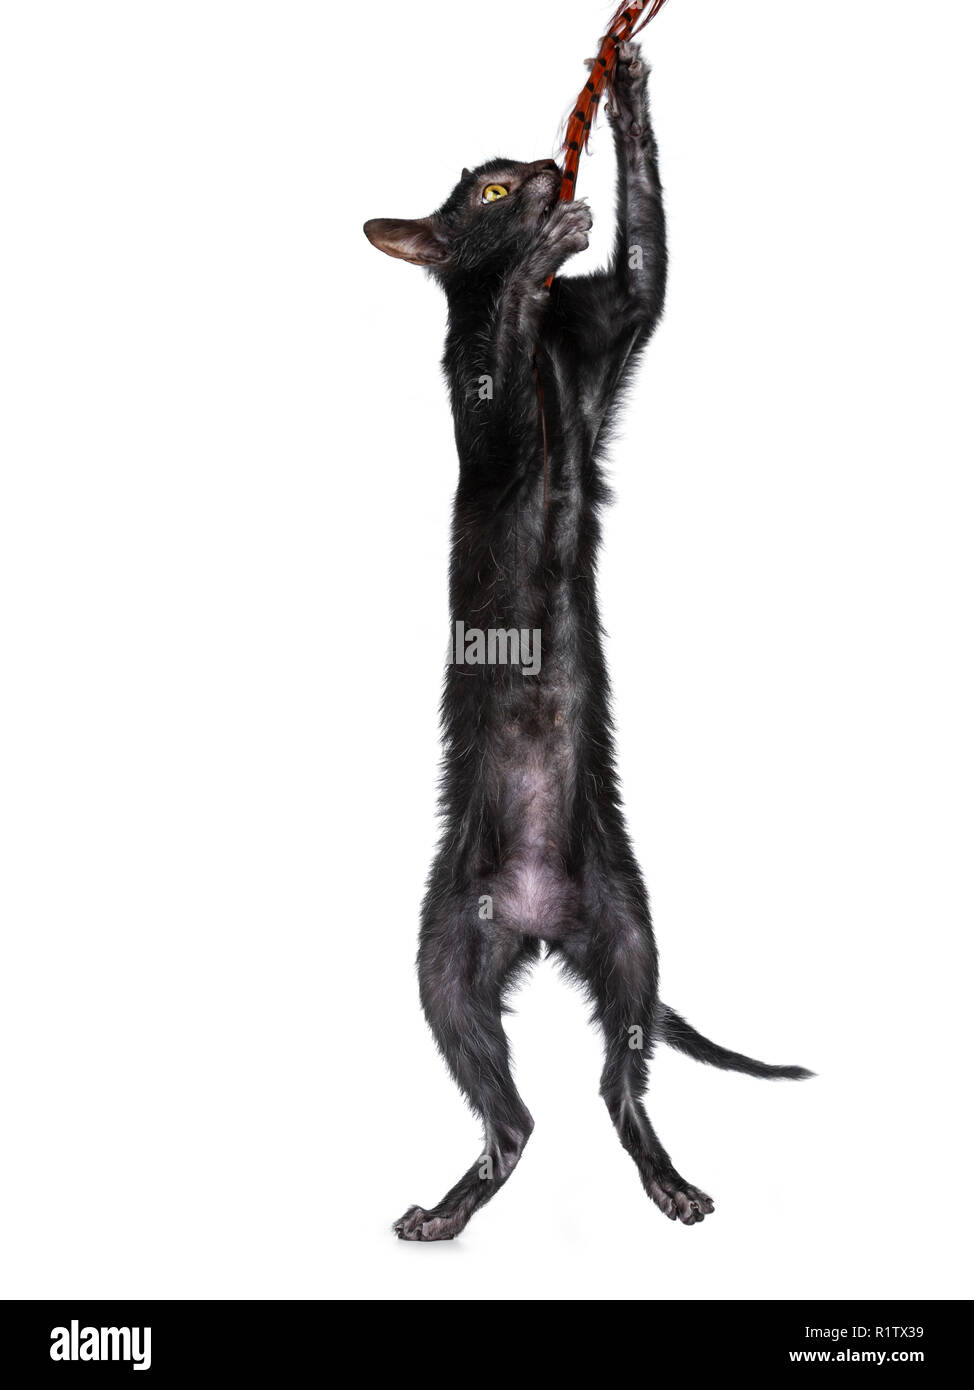 Cute young Lykoi / werewolf cat kitten standing / jumping on back paws catching a feather. Isolated on a white background. Stock Photo